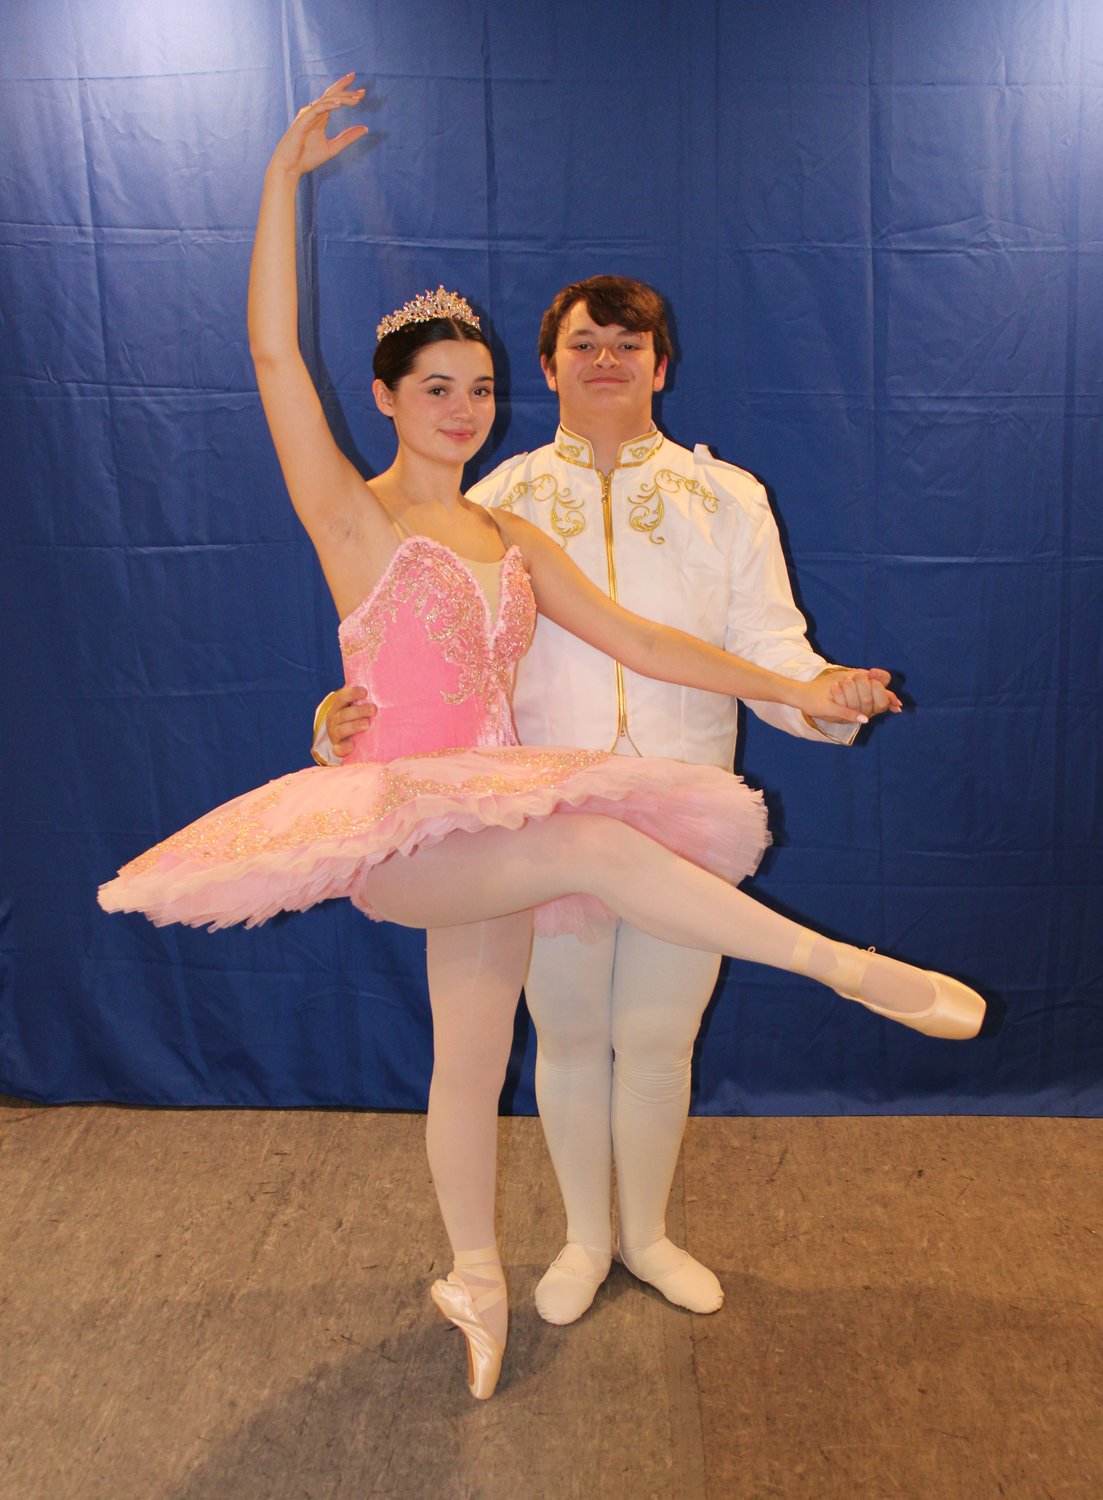 Jacelyn O'Brien, left, and Tyler Powley will dance the roles of the Sugar Plum Fairy and Cavalier in a performance of "The Nutcracker" on Saturday, November 26 at 12 noon.